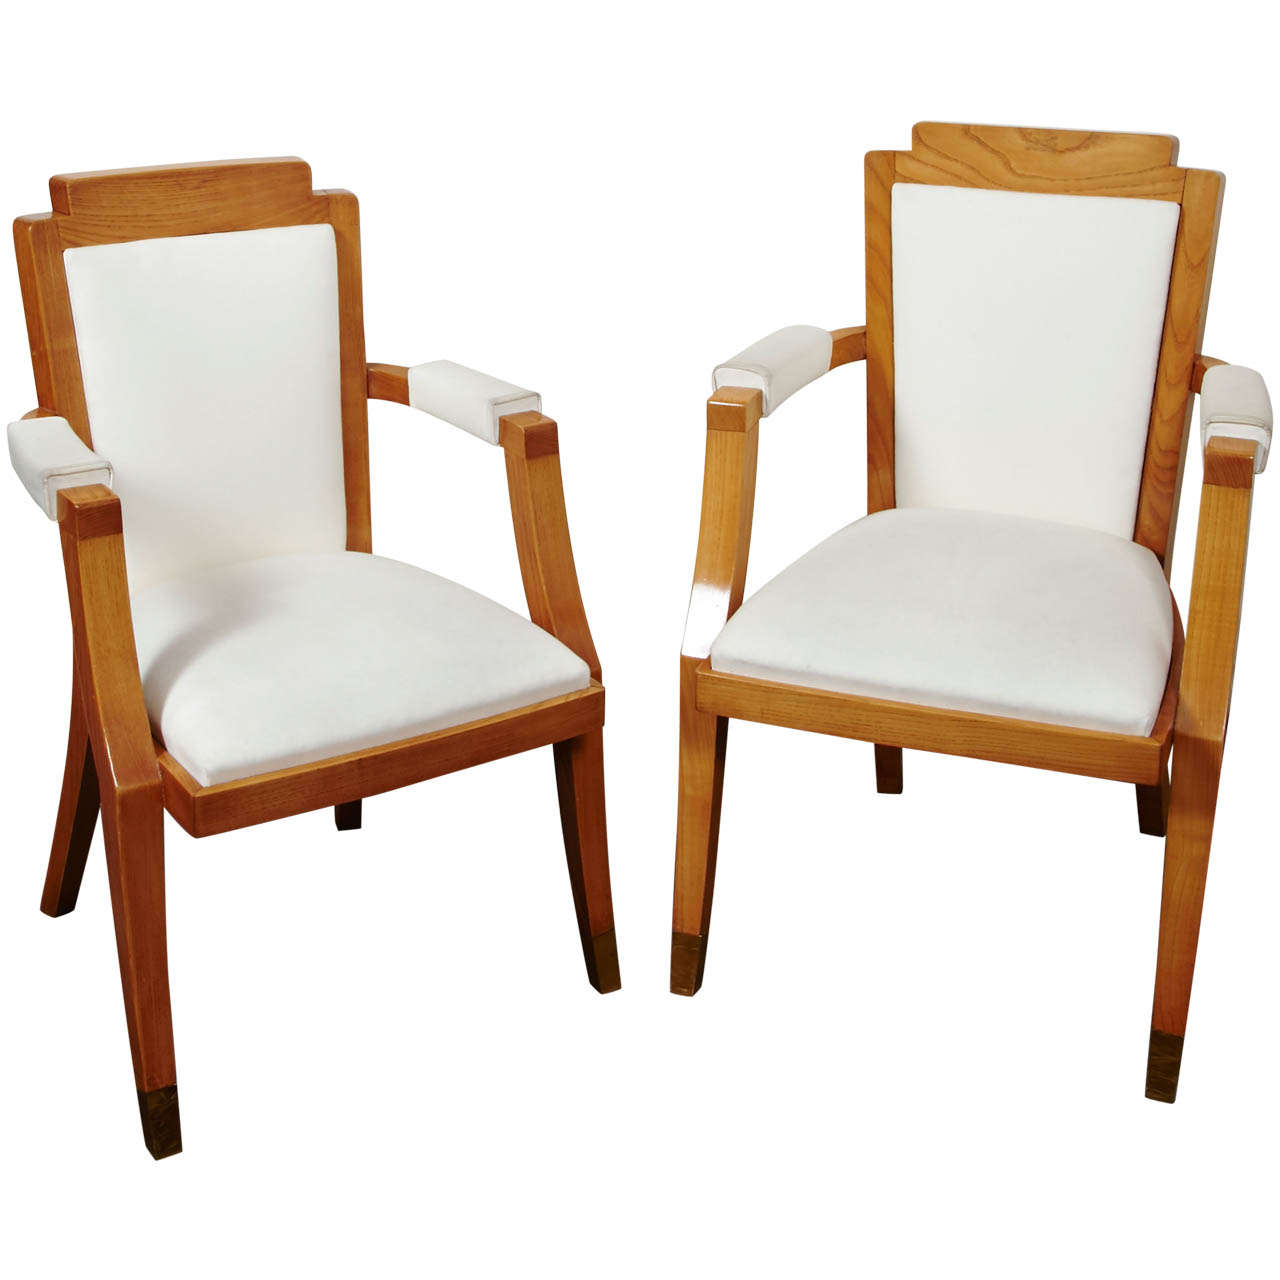 Pair of Beech Tree Armchairs by G. Darbois-Gaudin, 1949 For Sale